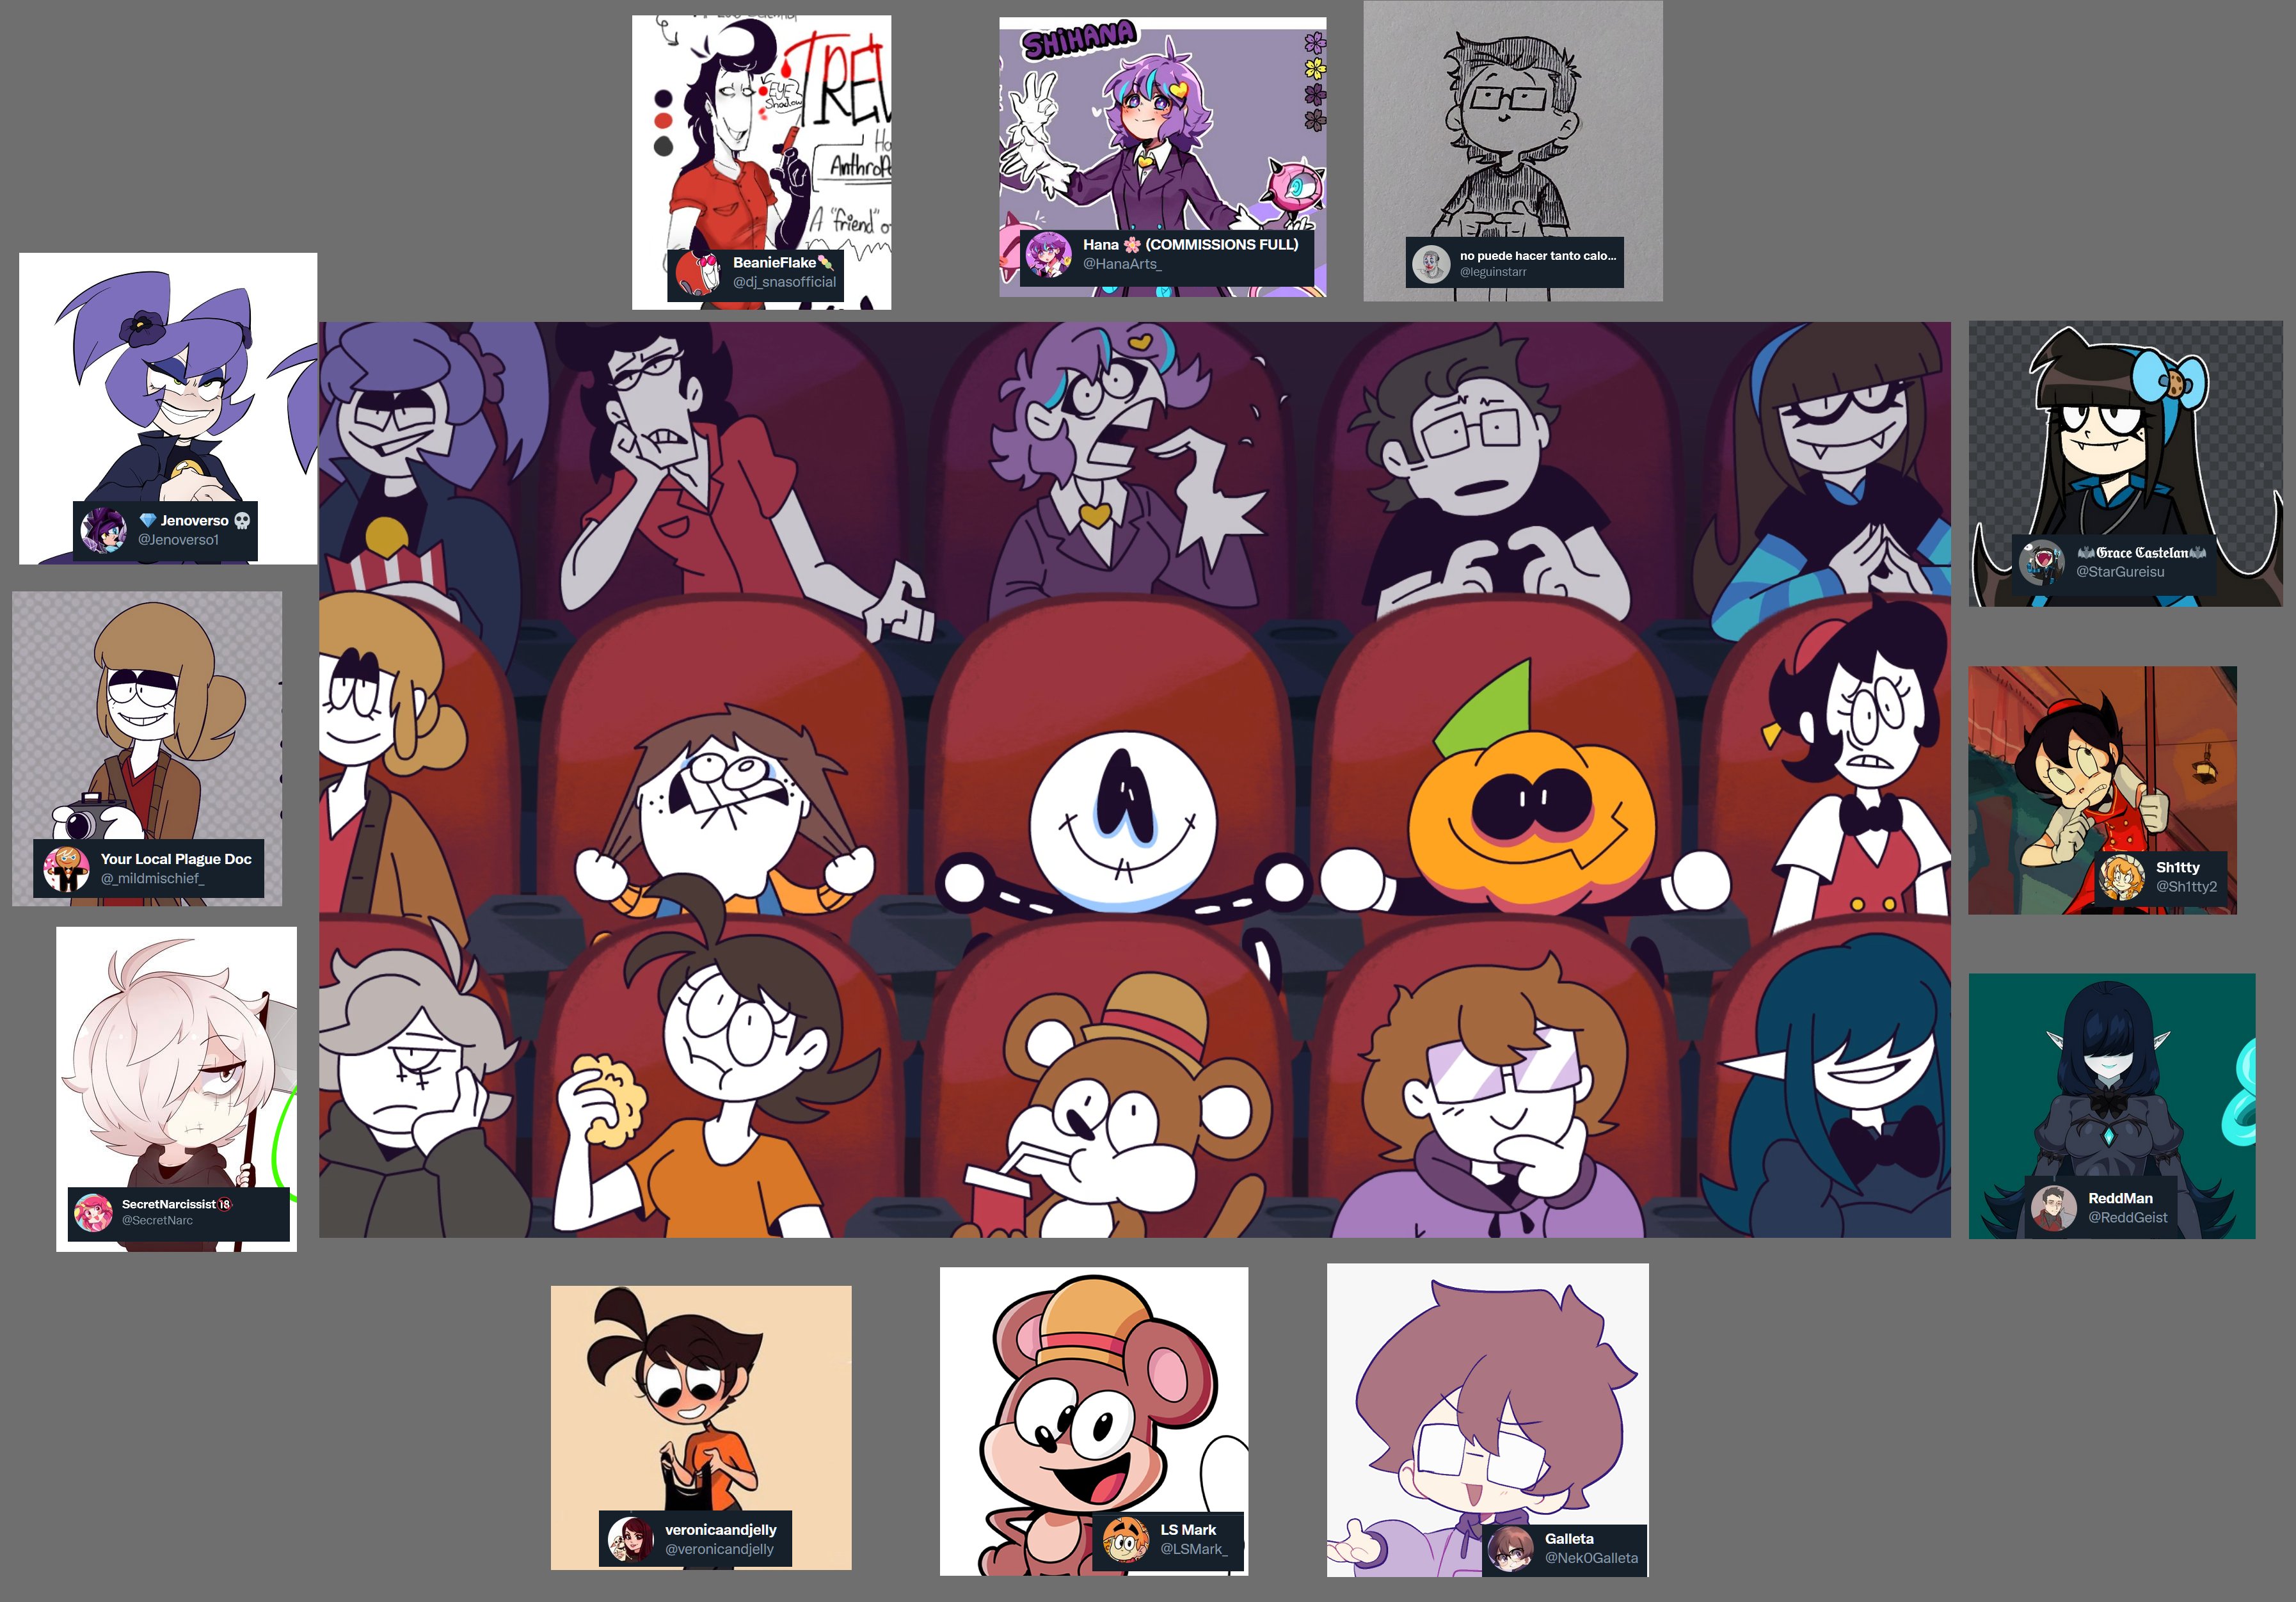 All Spooky Month Episodes Playing At Once V2 (Newgrounds Version